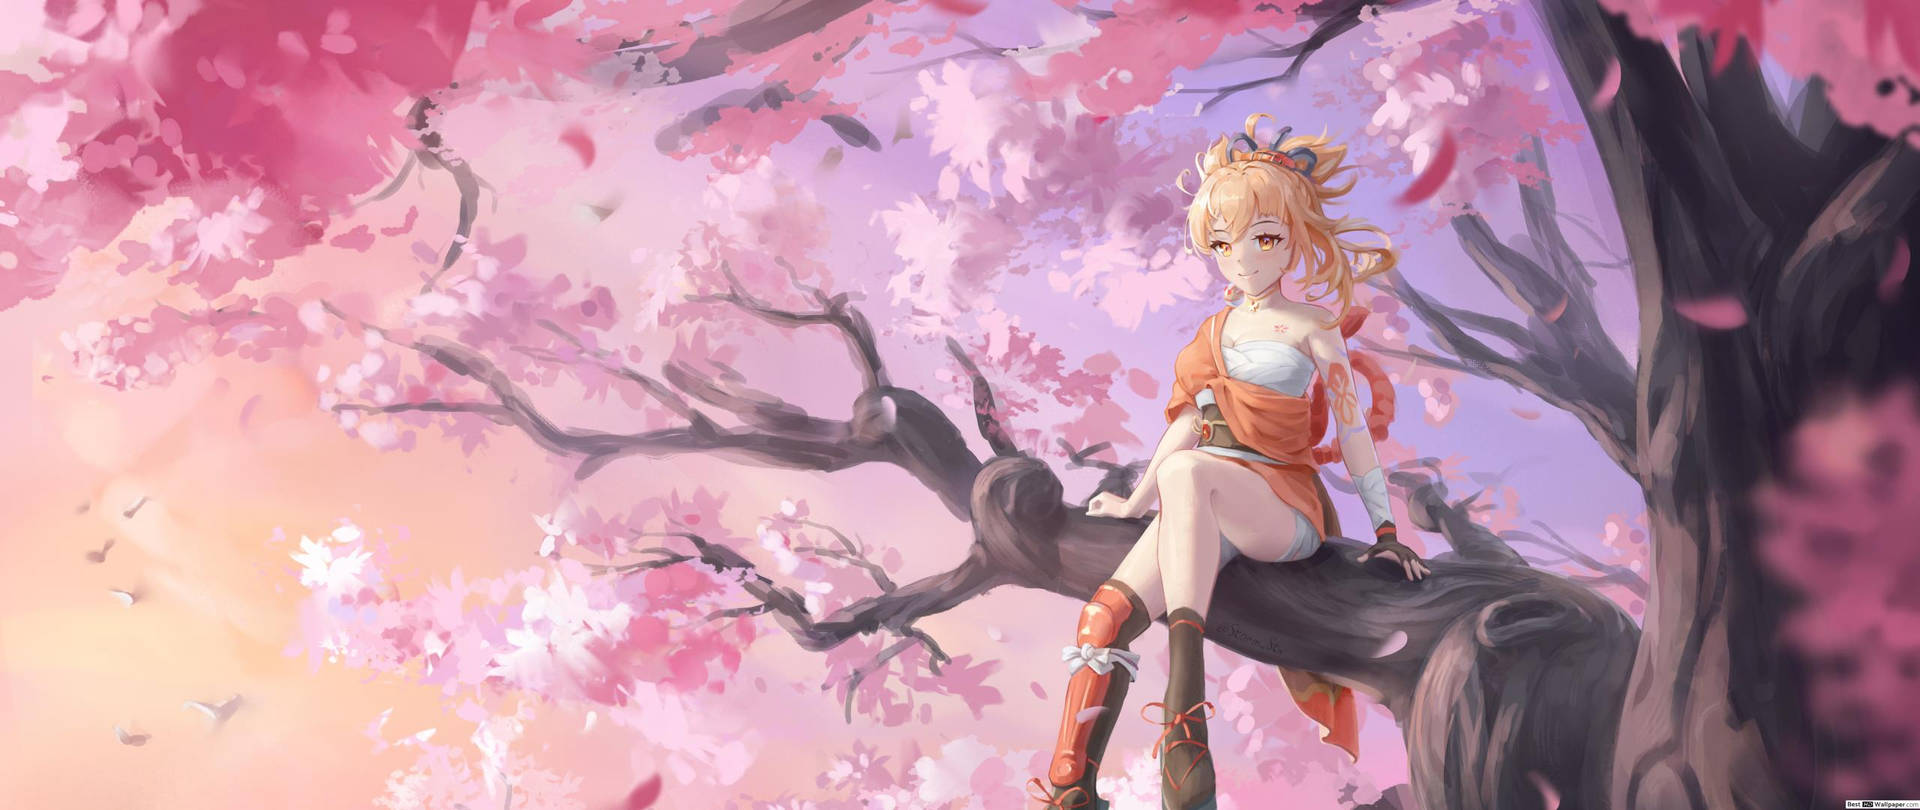 Cool Anime Girl On Cherry Blossom Background